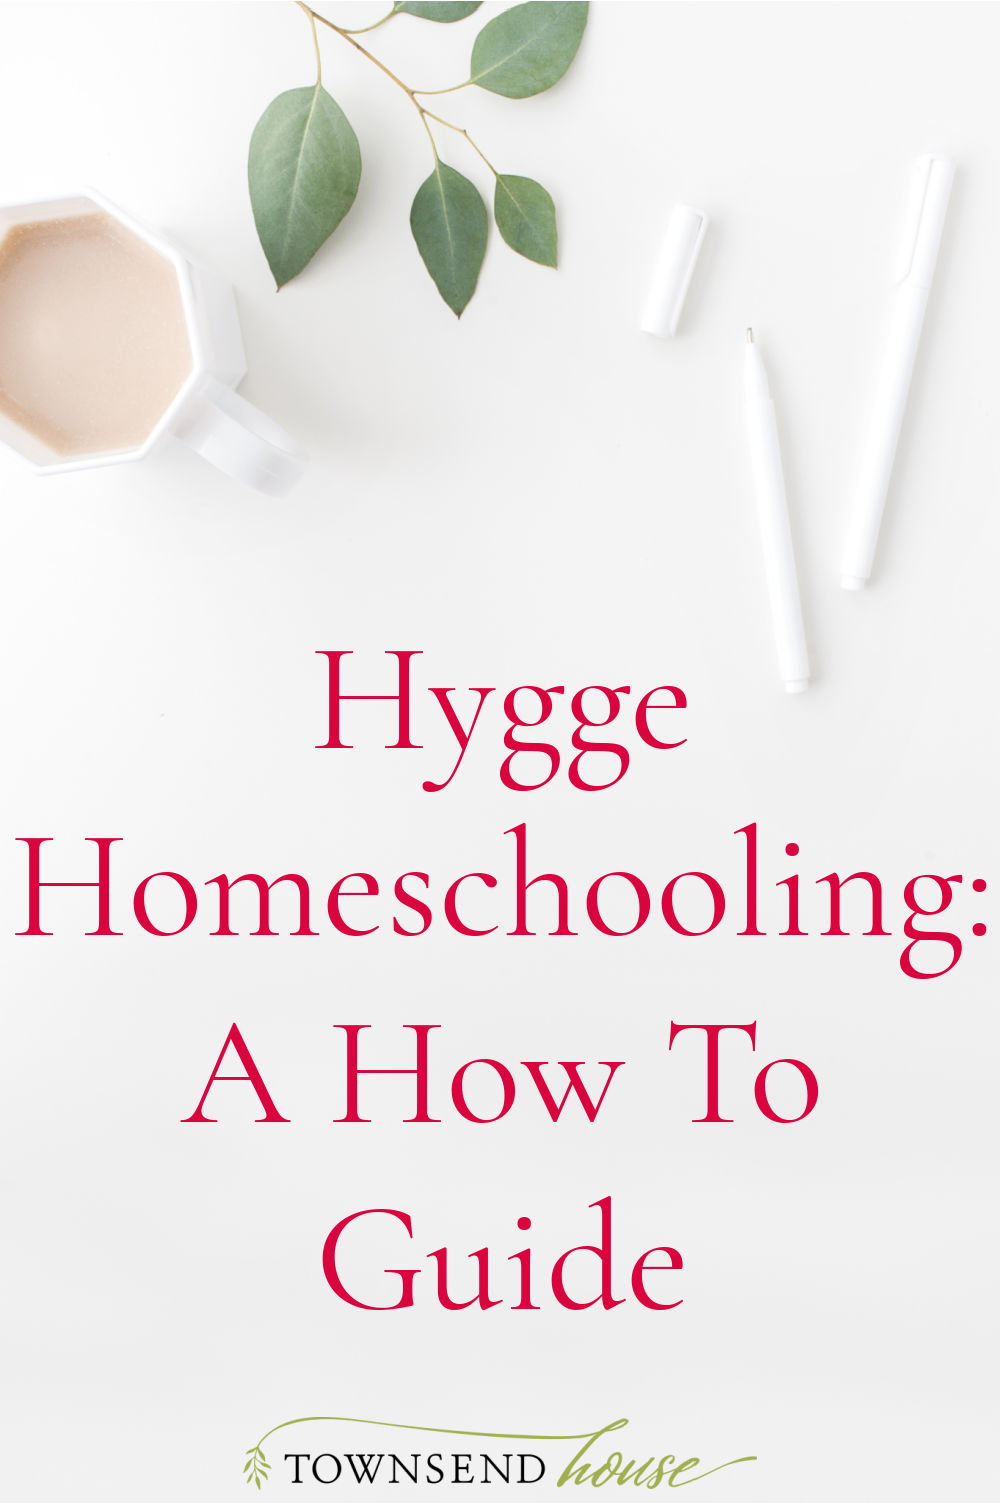 Hygge Homeschooling: A How to Guide